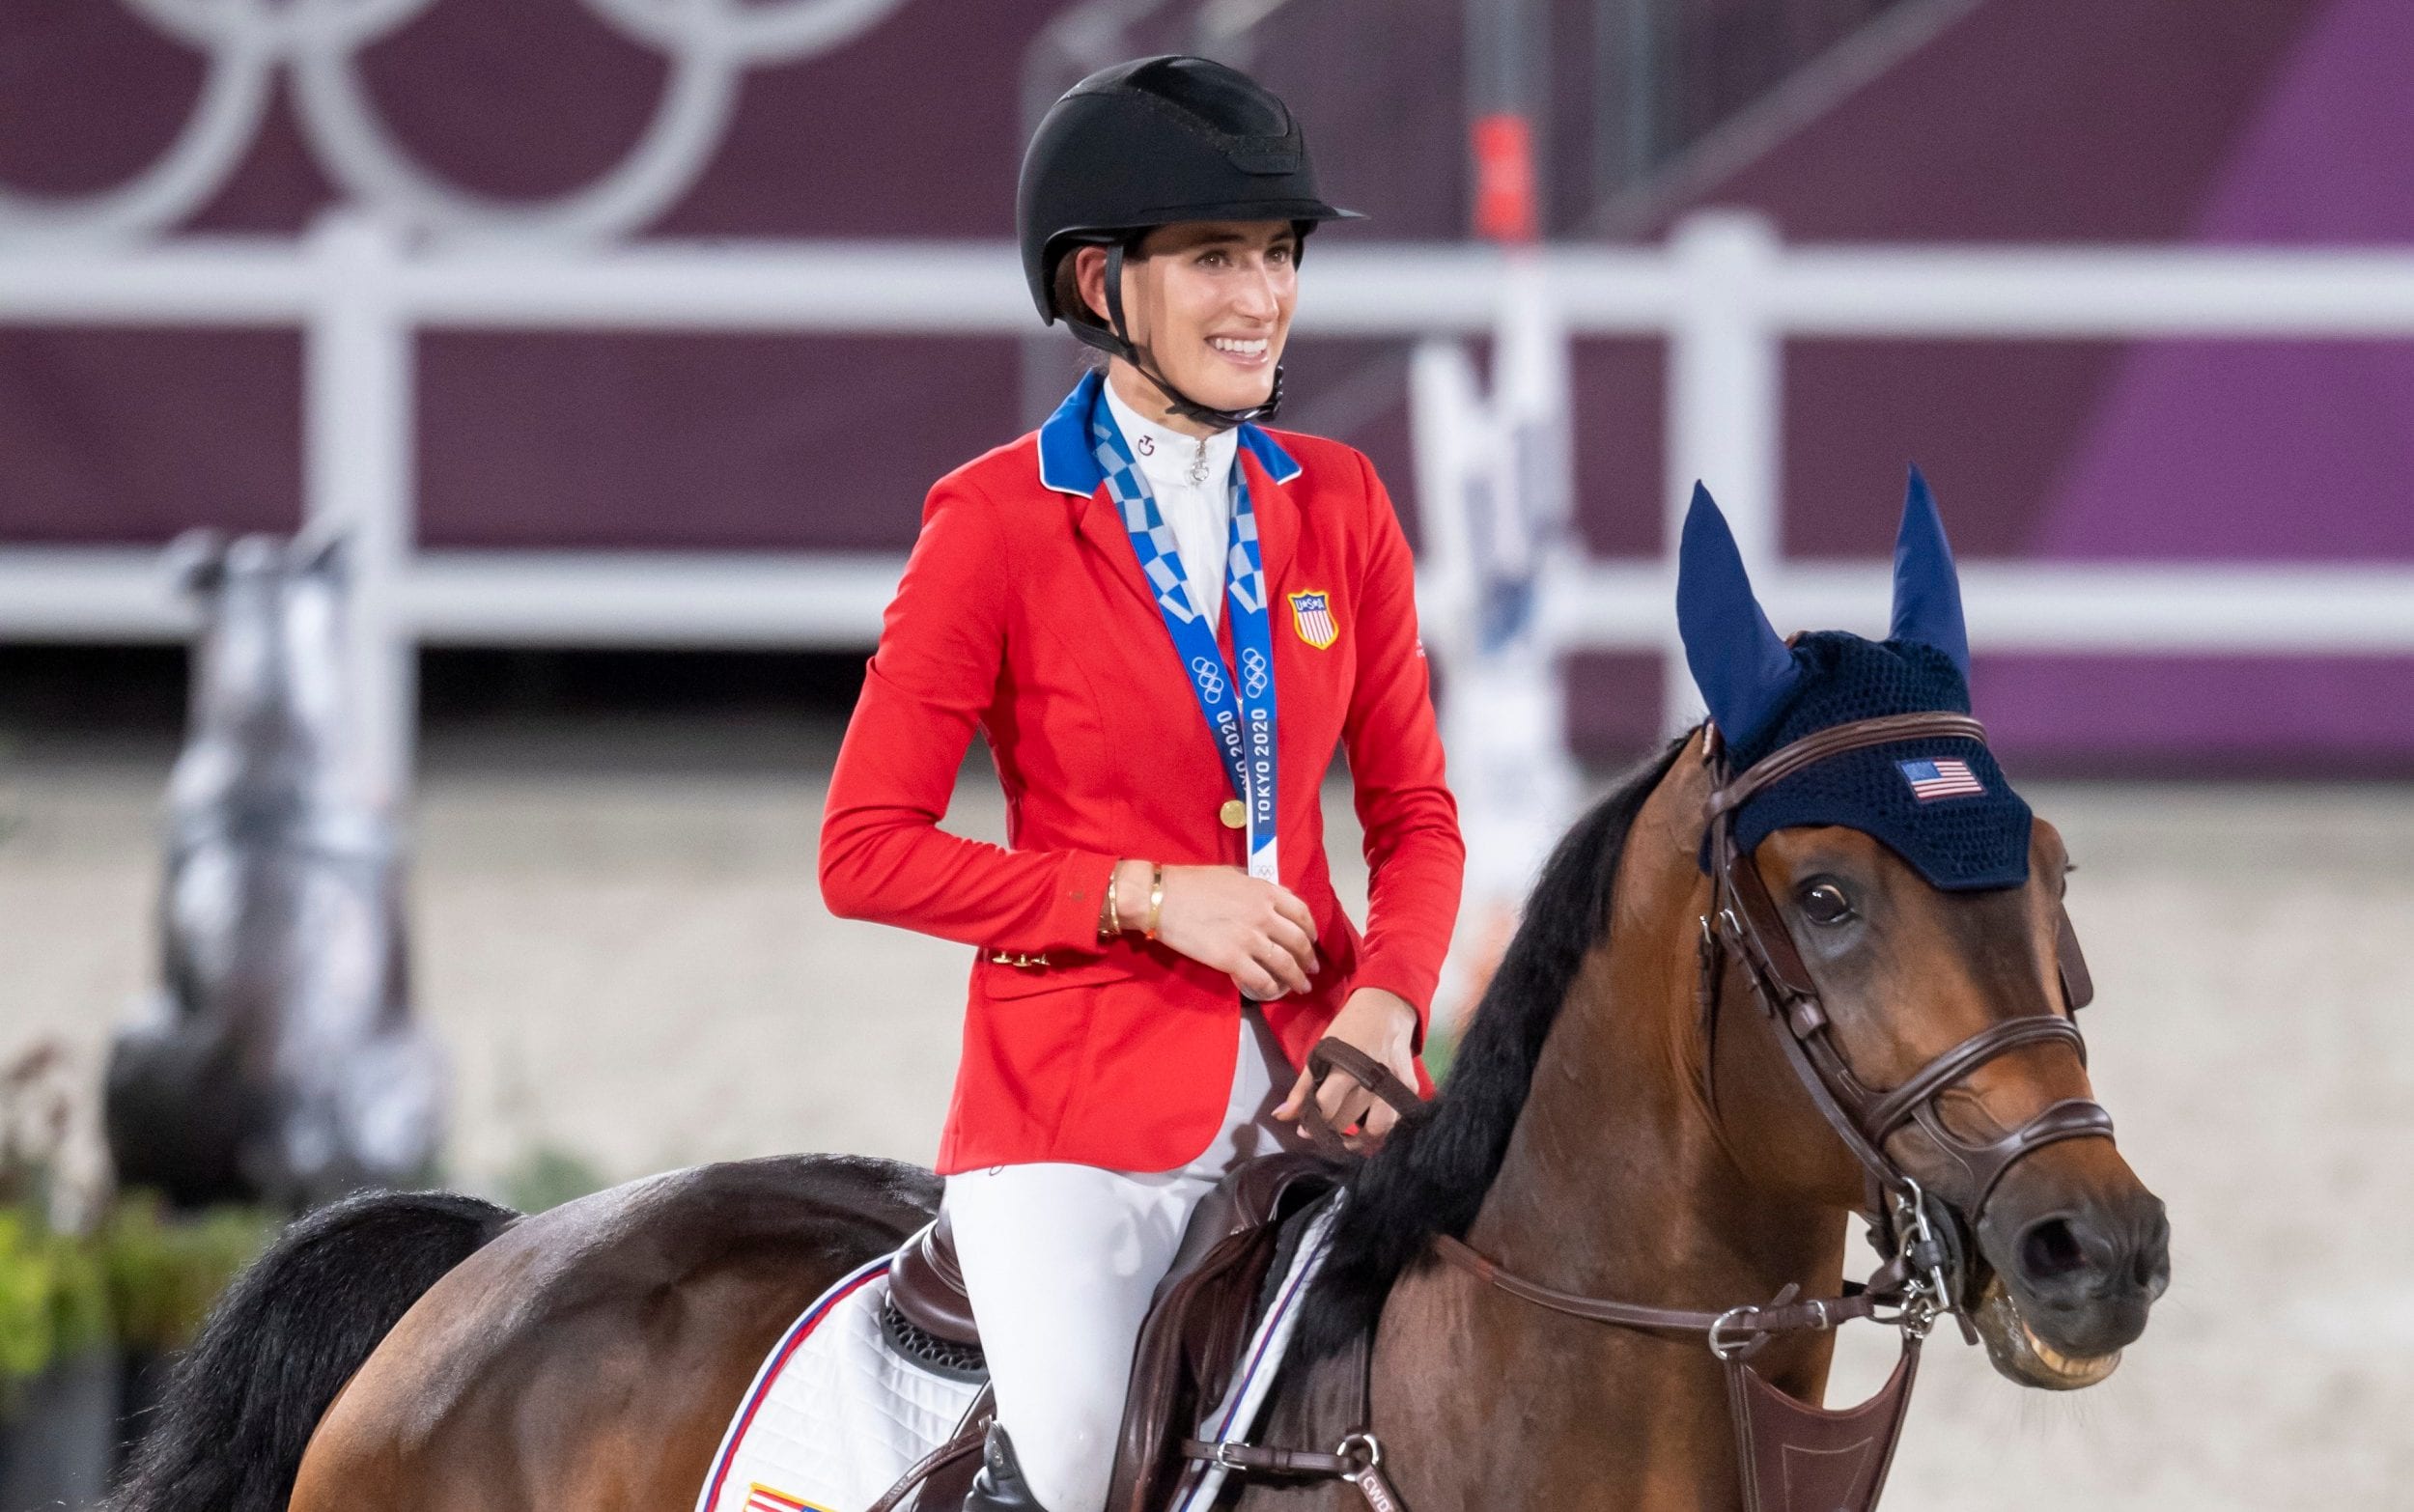 jessica springsteen won equestrian jumping team silver with the united states at the tokyo 2020